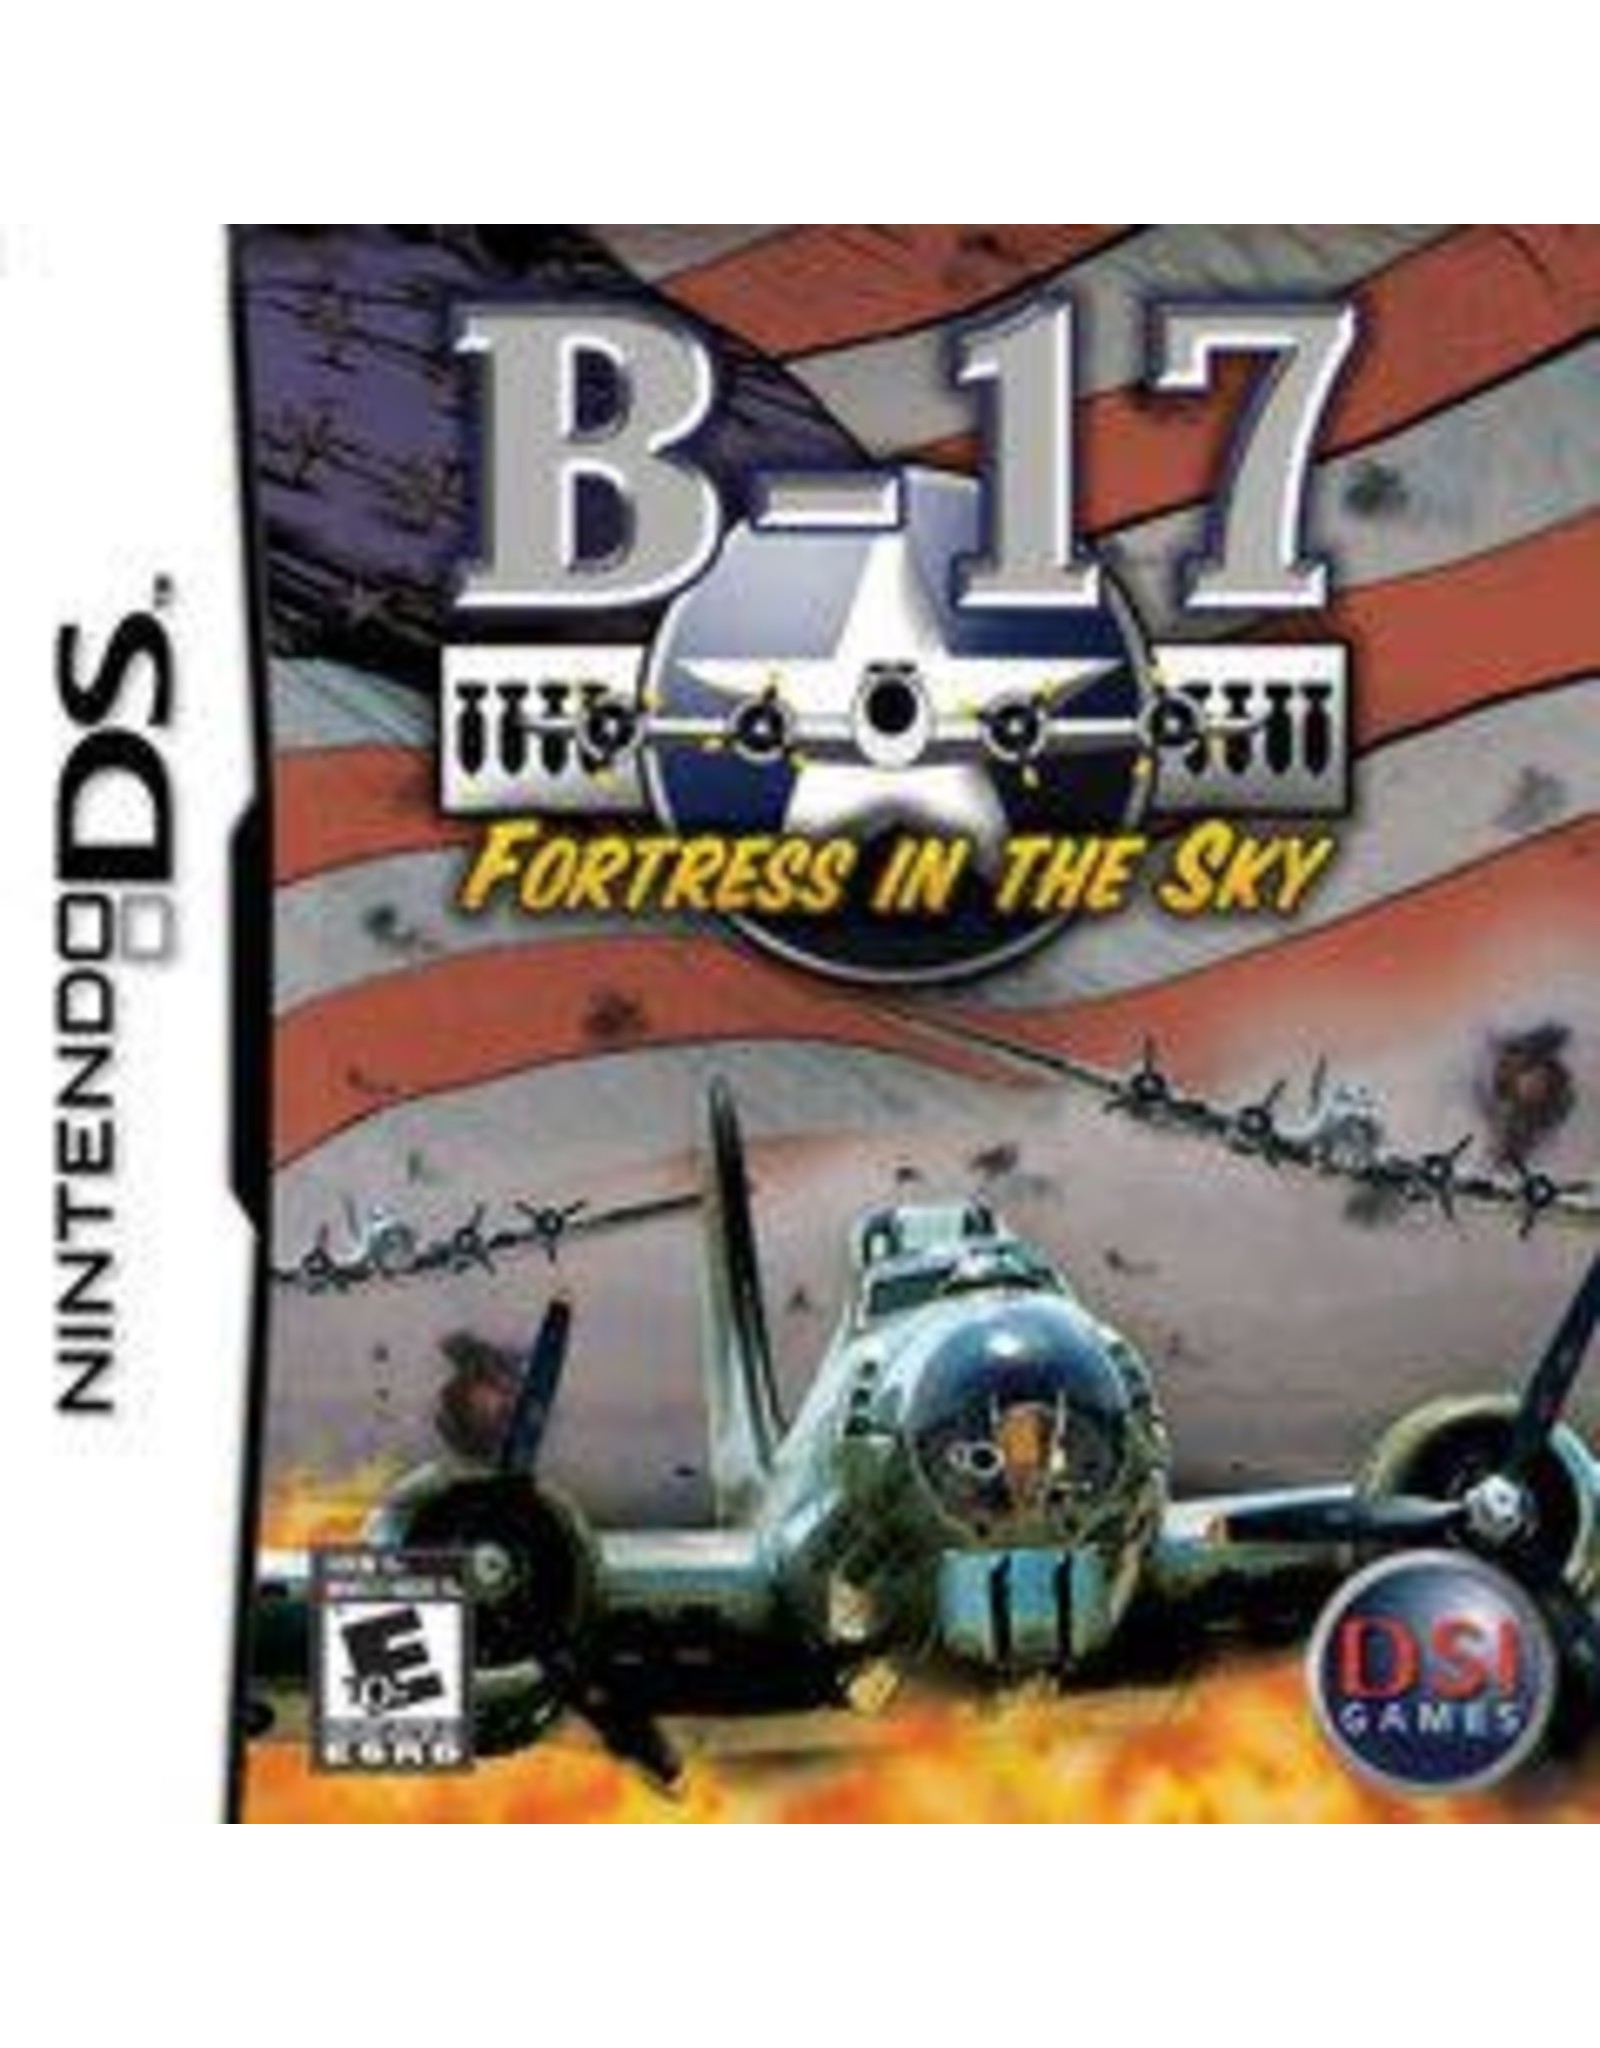 Nintendo DS B-17 Fortress in the Sky (Cart Only)